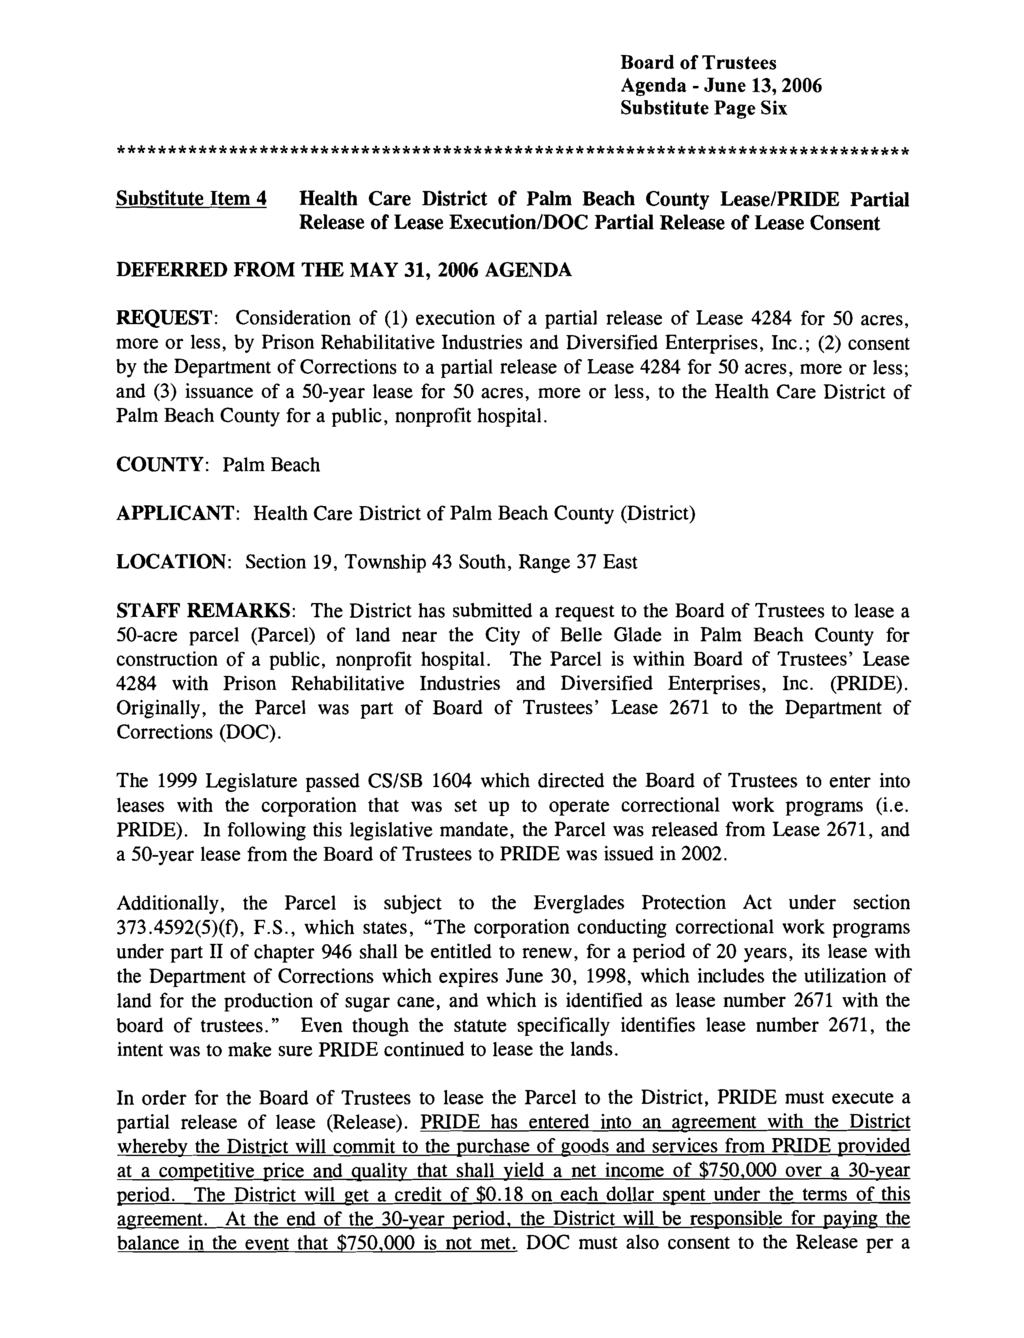 Substitute Page Six Substitute Item 4 Health Care District of Palm Beach County LeaseIPRIDE Partial Release of Lease ExecutionIDOC Partial Release of Lease Consent DEFERRED FROM THE MAY 31,2006